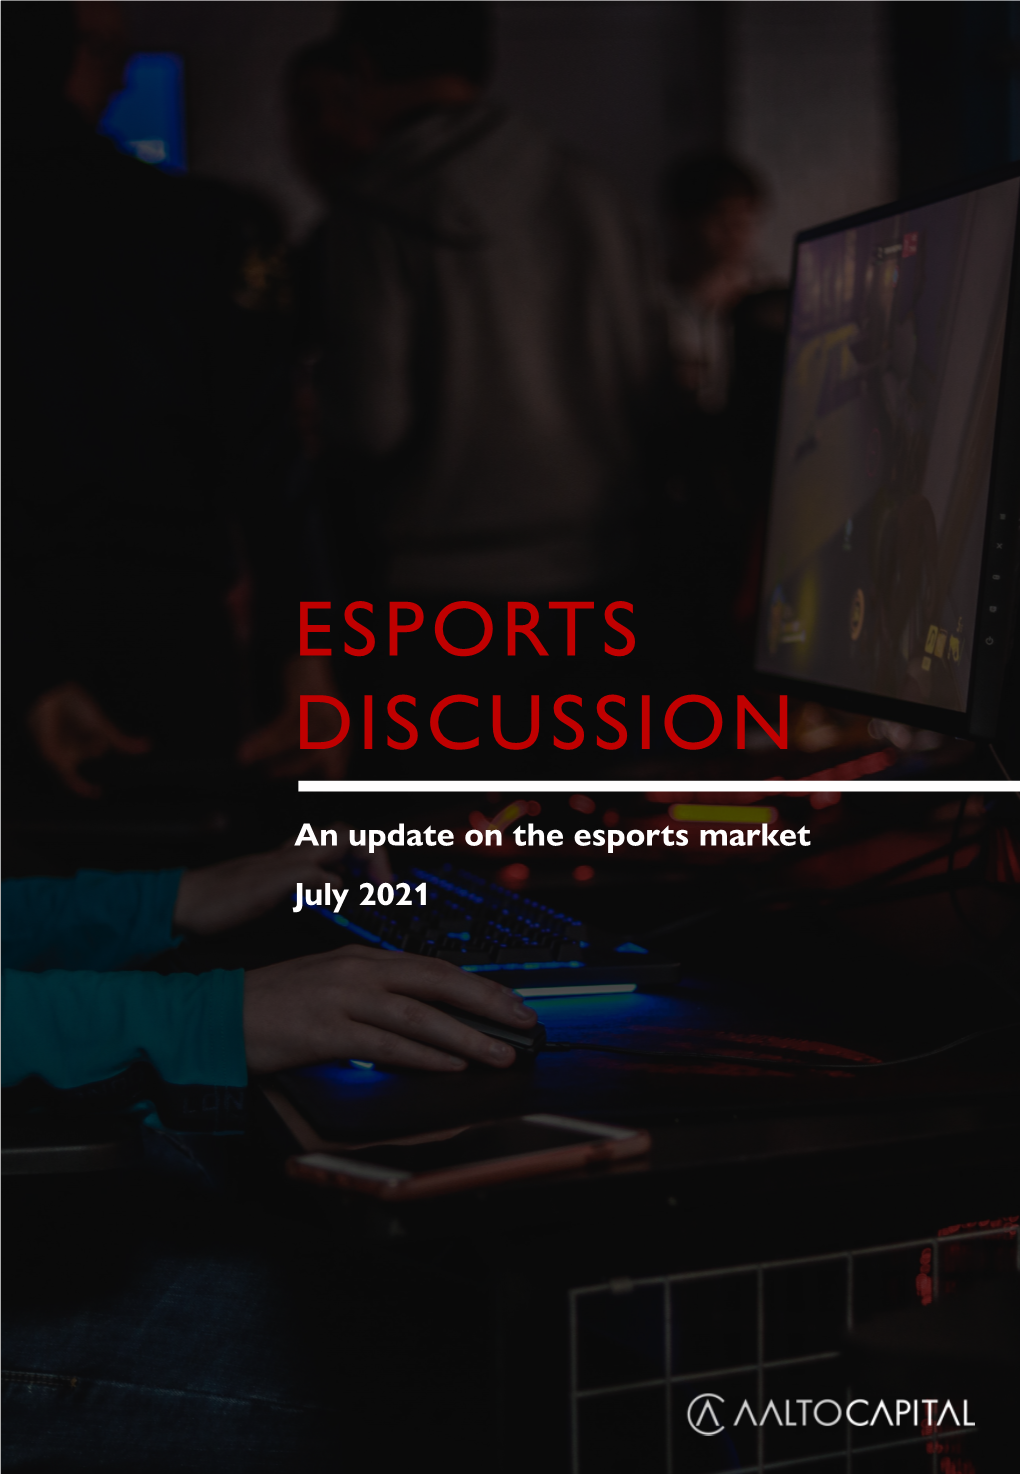 Esports Report, the Market Has Although in 2020 the Global Esports Audience Was Esports Enthusiasts Are Continued to Go from Strength to Strength